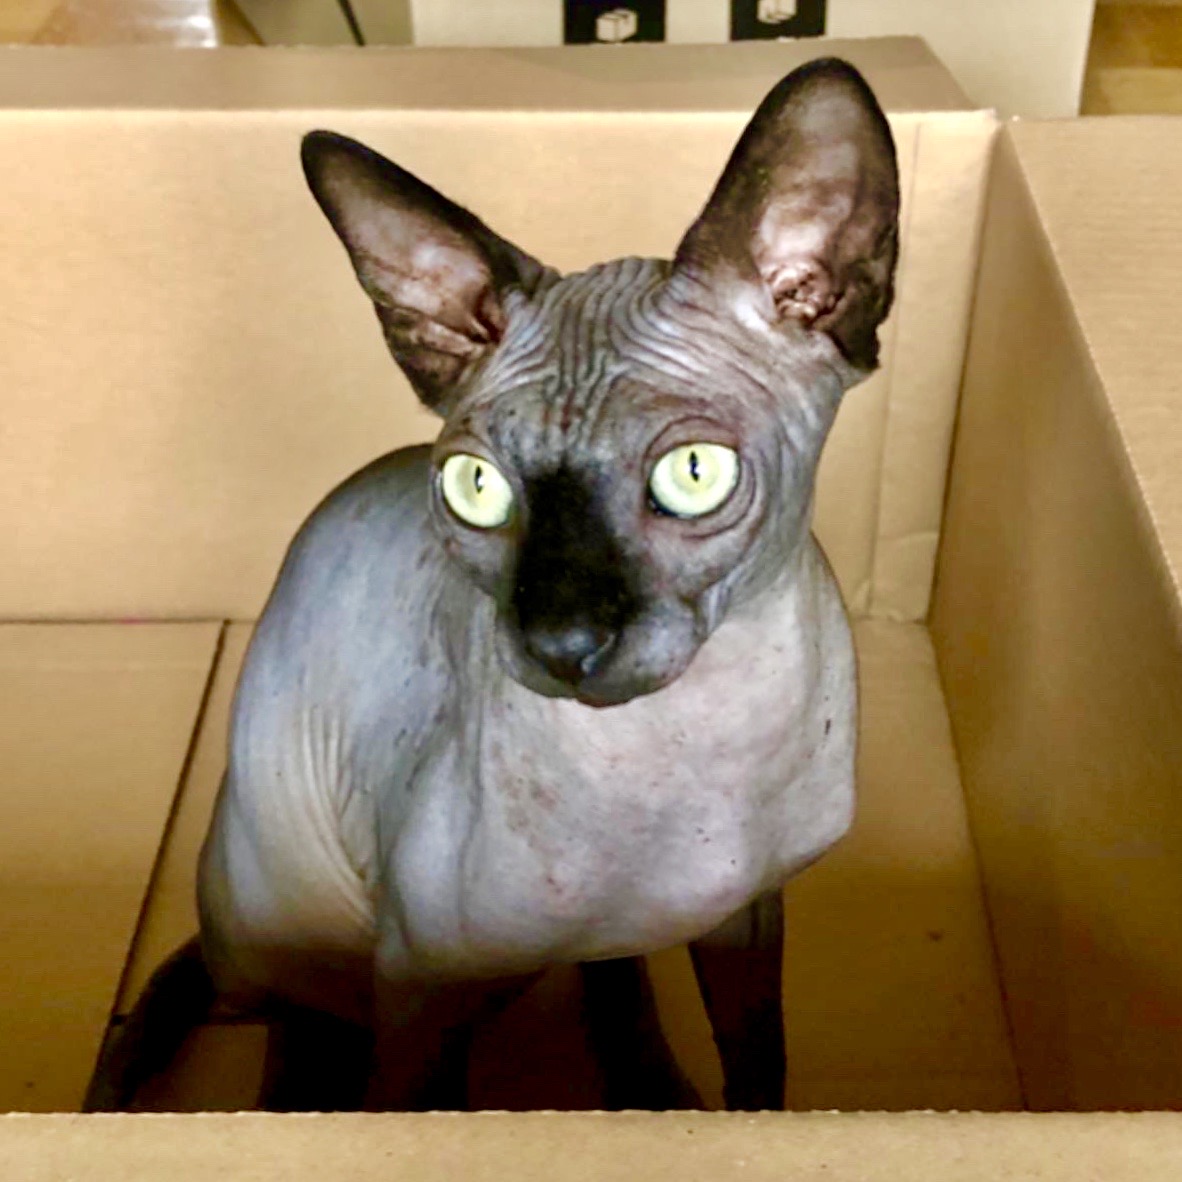 Lazarus, my Sphynx cat, and his Instagram! I don't have the live stream up (we mostly spent it talking about how he's toilet trained!), but you can catch wonderful updates of him here: https://www.instagram.com/lazarus_sphynxcat/